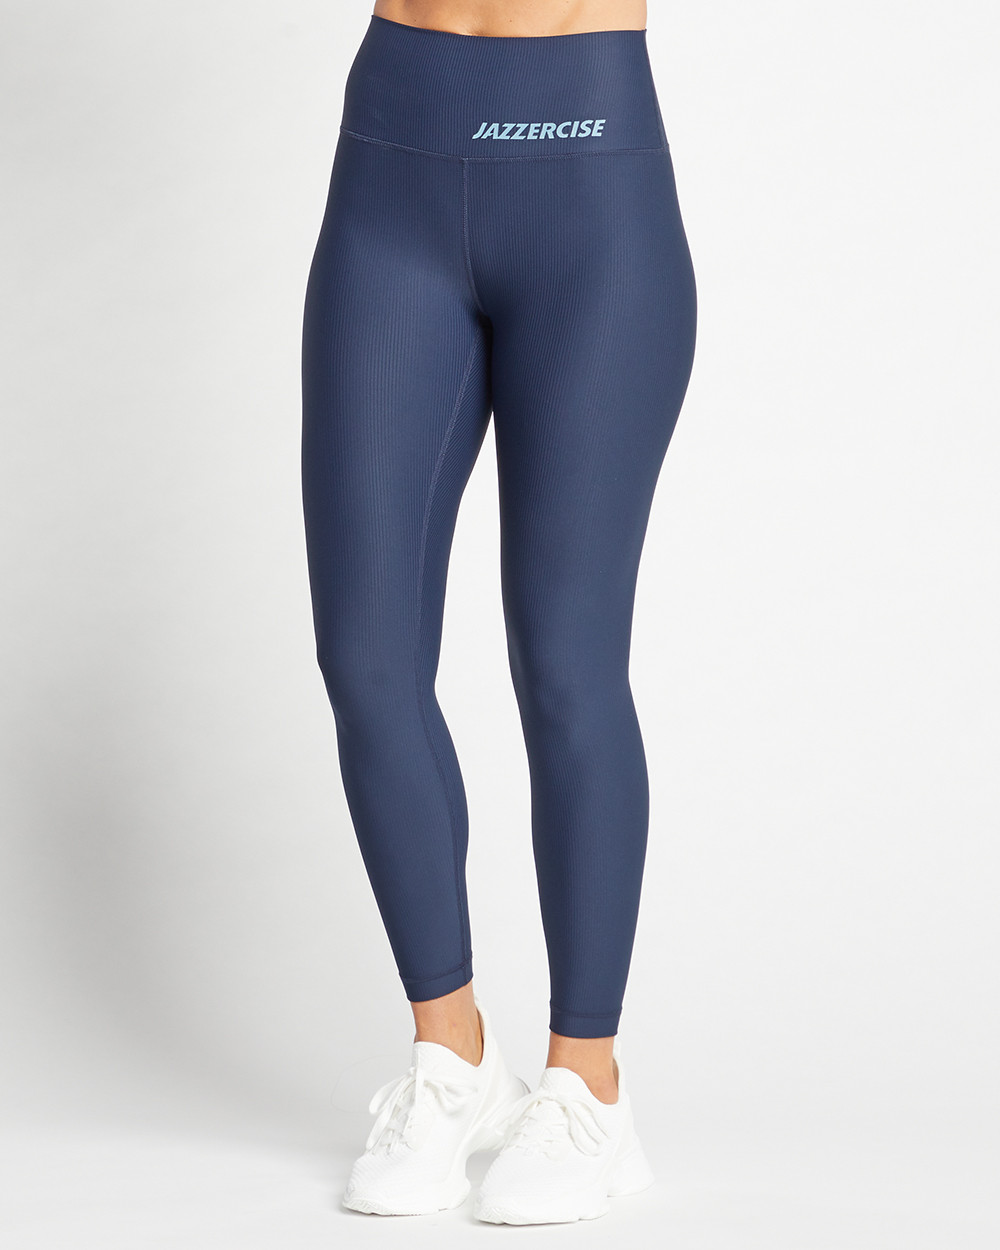 90 DEGREE BY Reflex Luxe Collection Womens XS Leggings Moisture Wicking NWT  £19.72 - PicClick UK